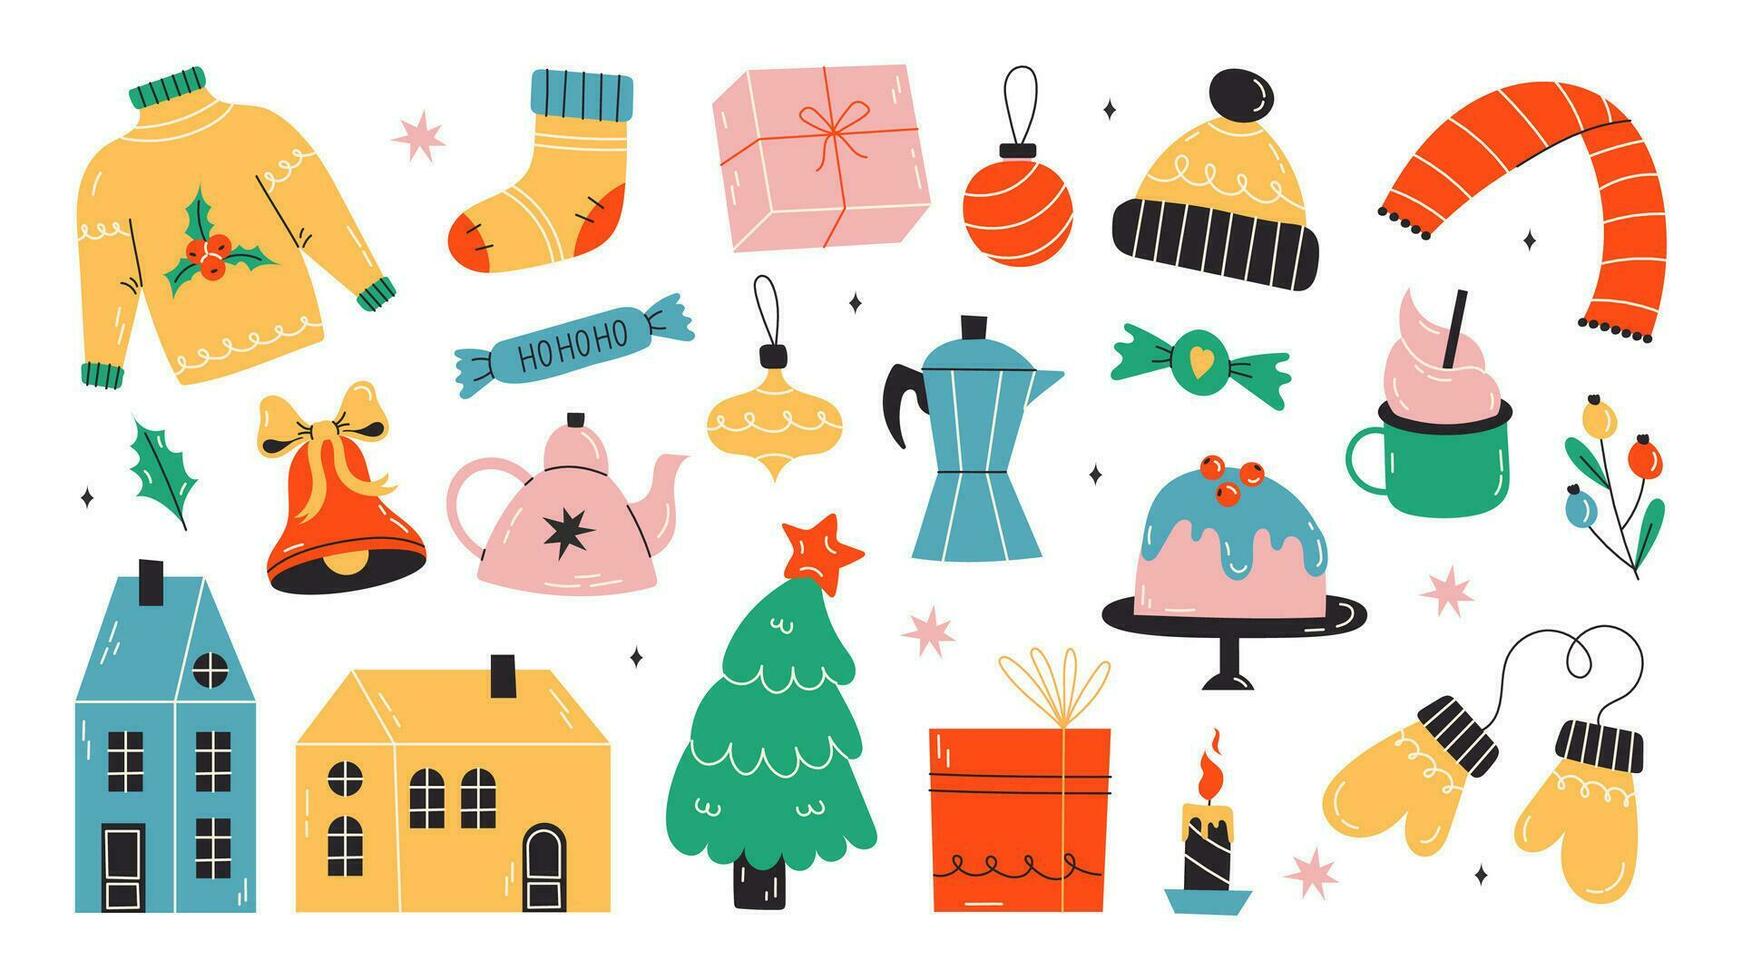 Set of Cute Merry Christmas and Happy New Year Illustrations or stickers. Festive christmas characters and objects. Vector stock illustration on isolated white background. Winter clothes, bell, gift.